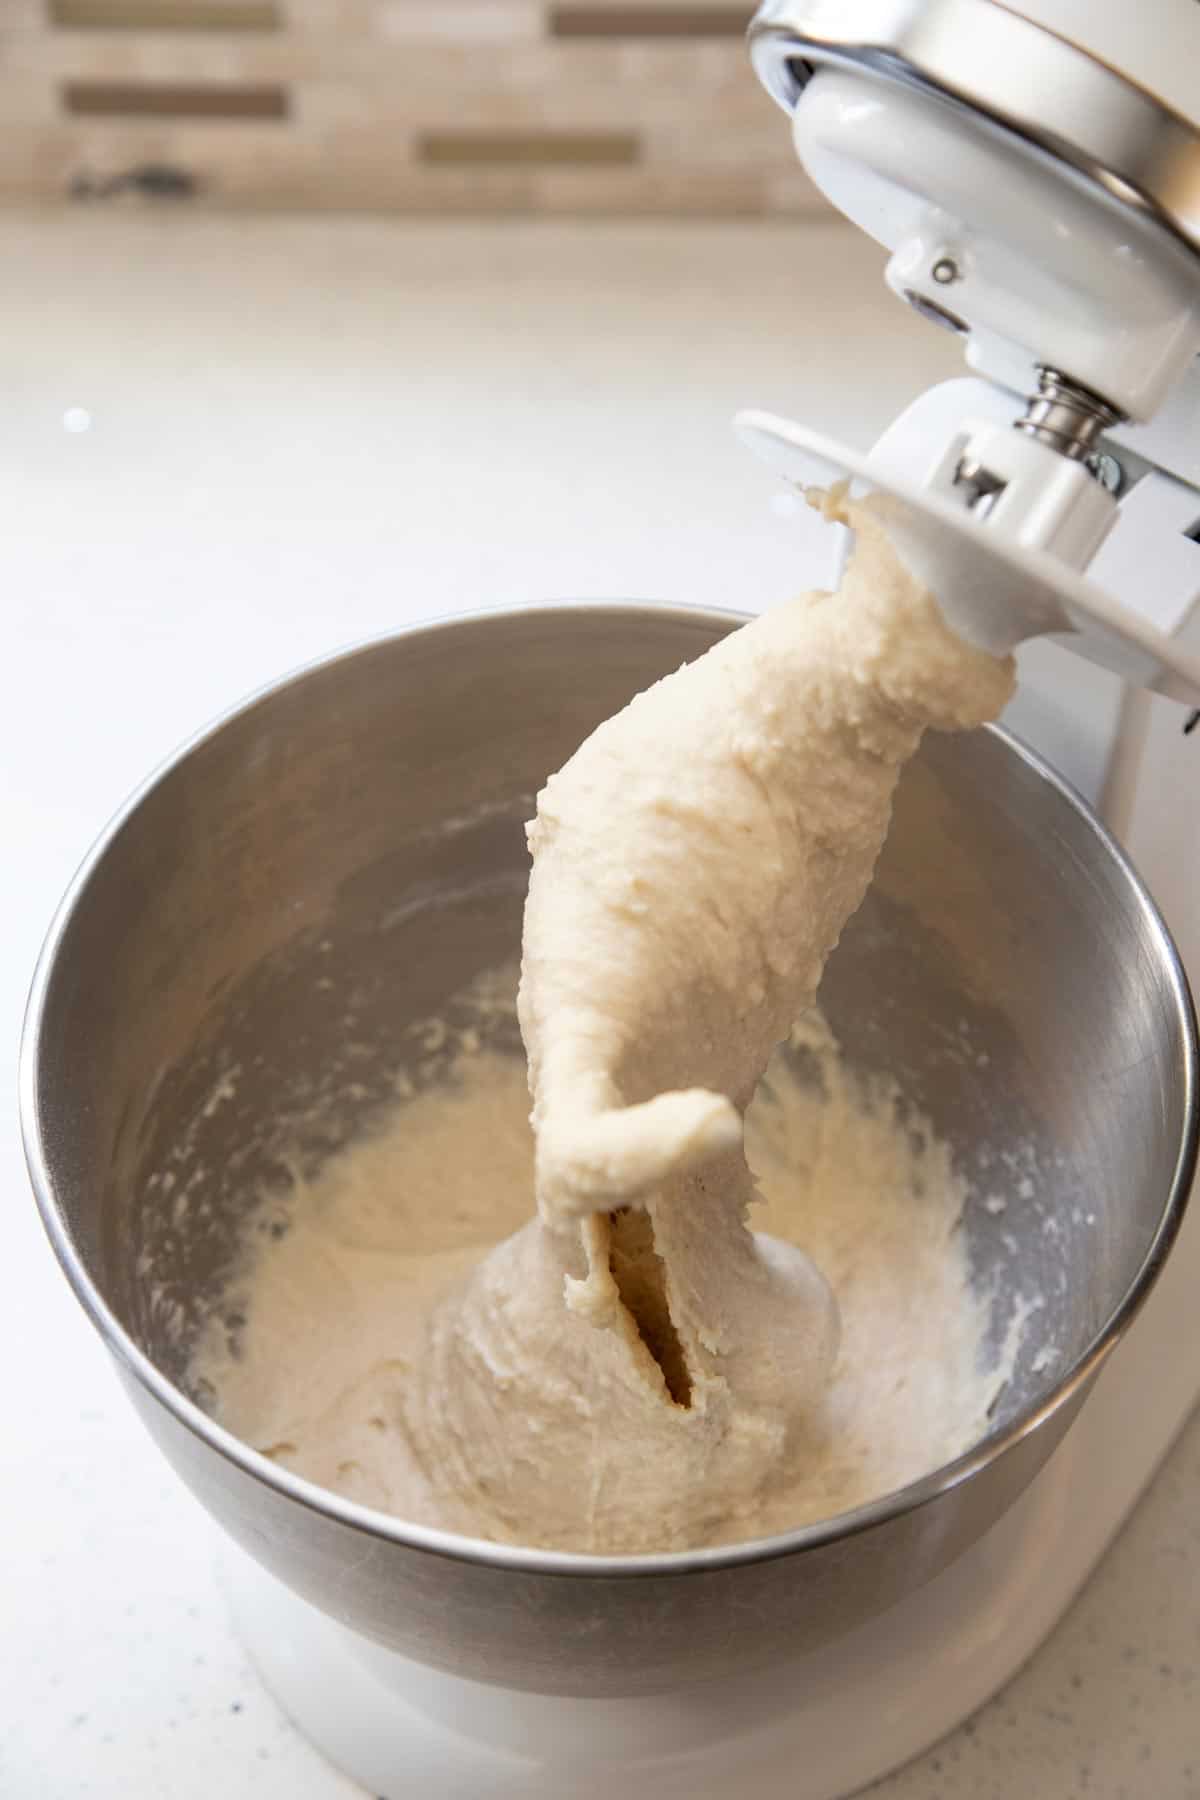 Cinnamon roll dough in a stand mixer.